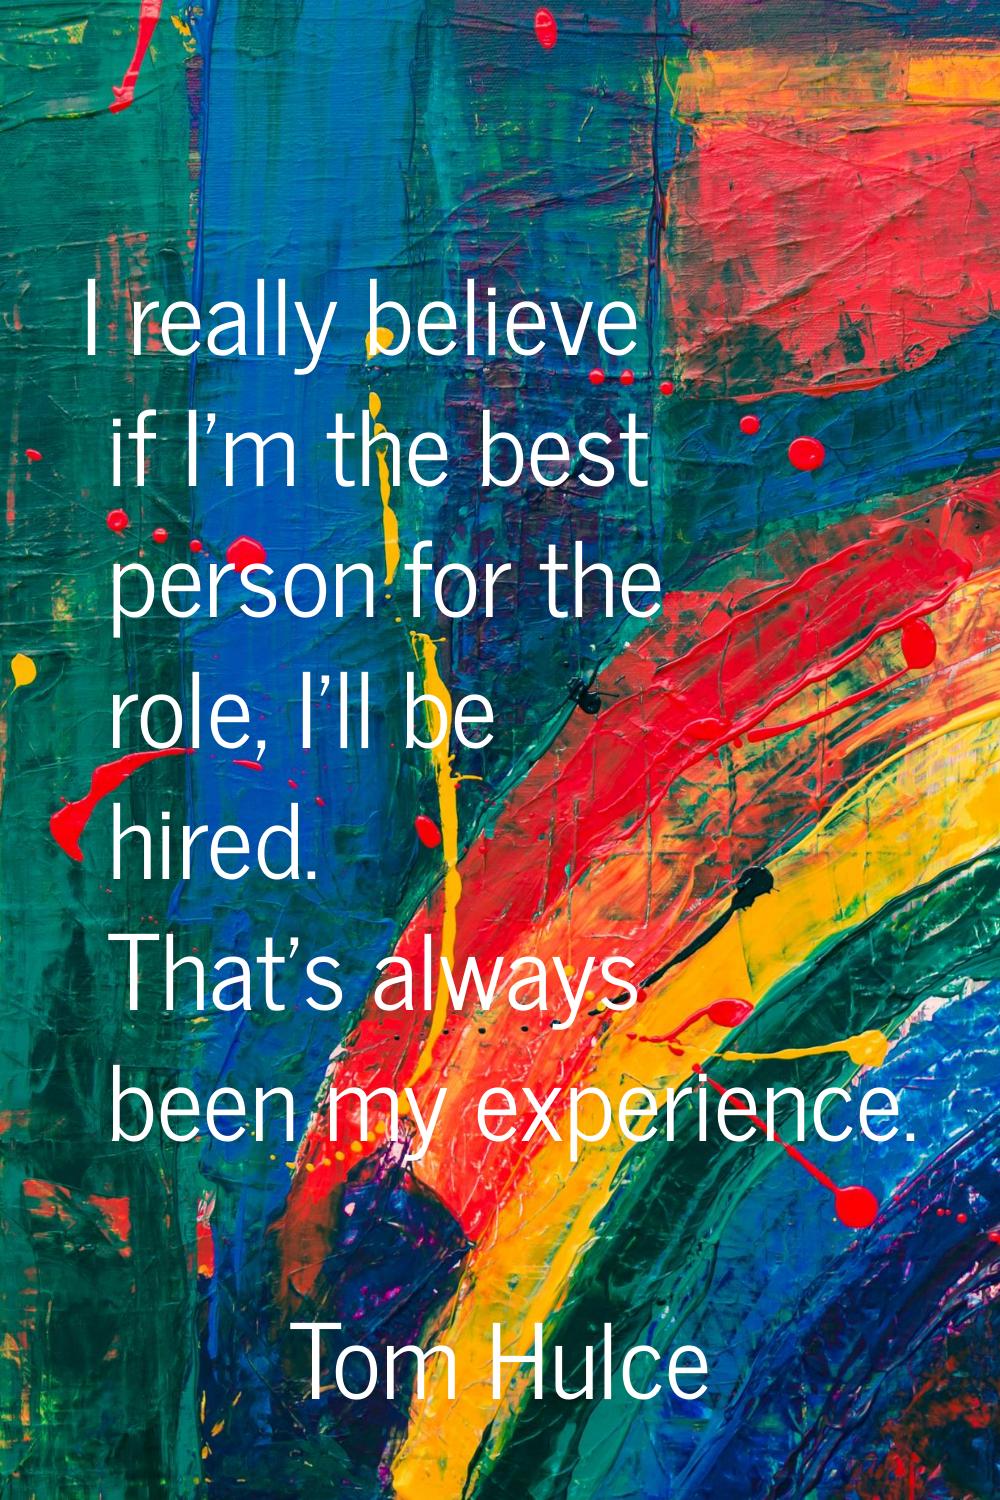 I really believe if I'm the best person for the role, I'll be hired. That's always been my experien